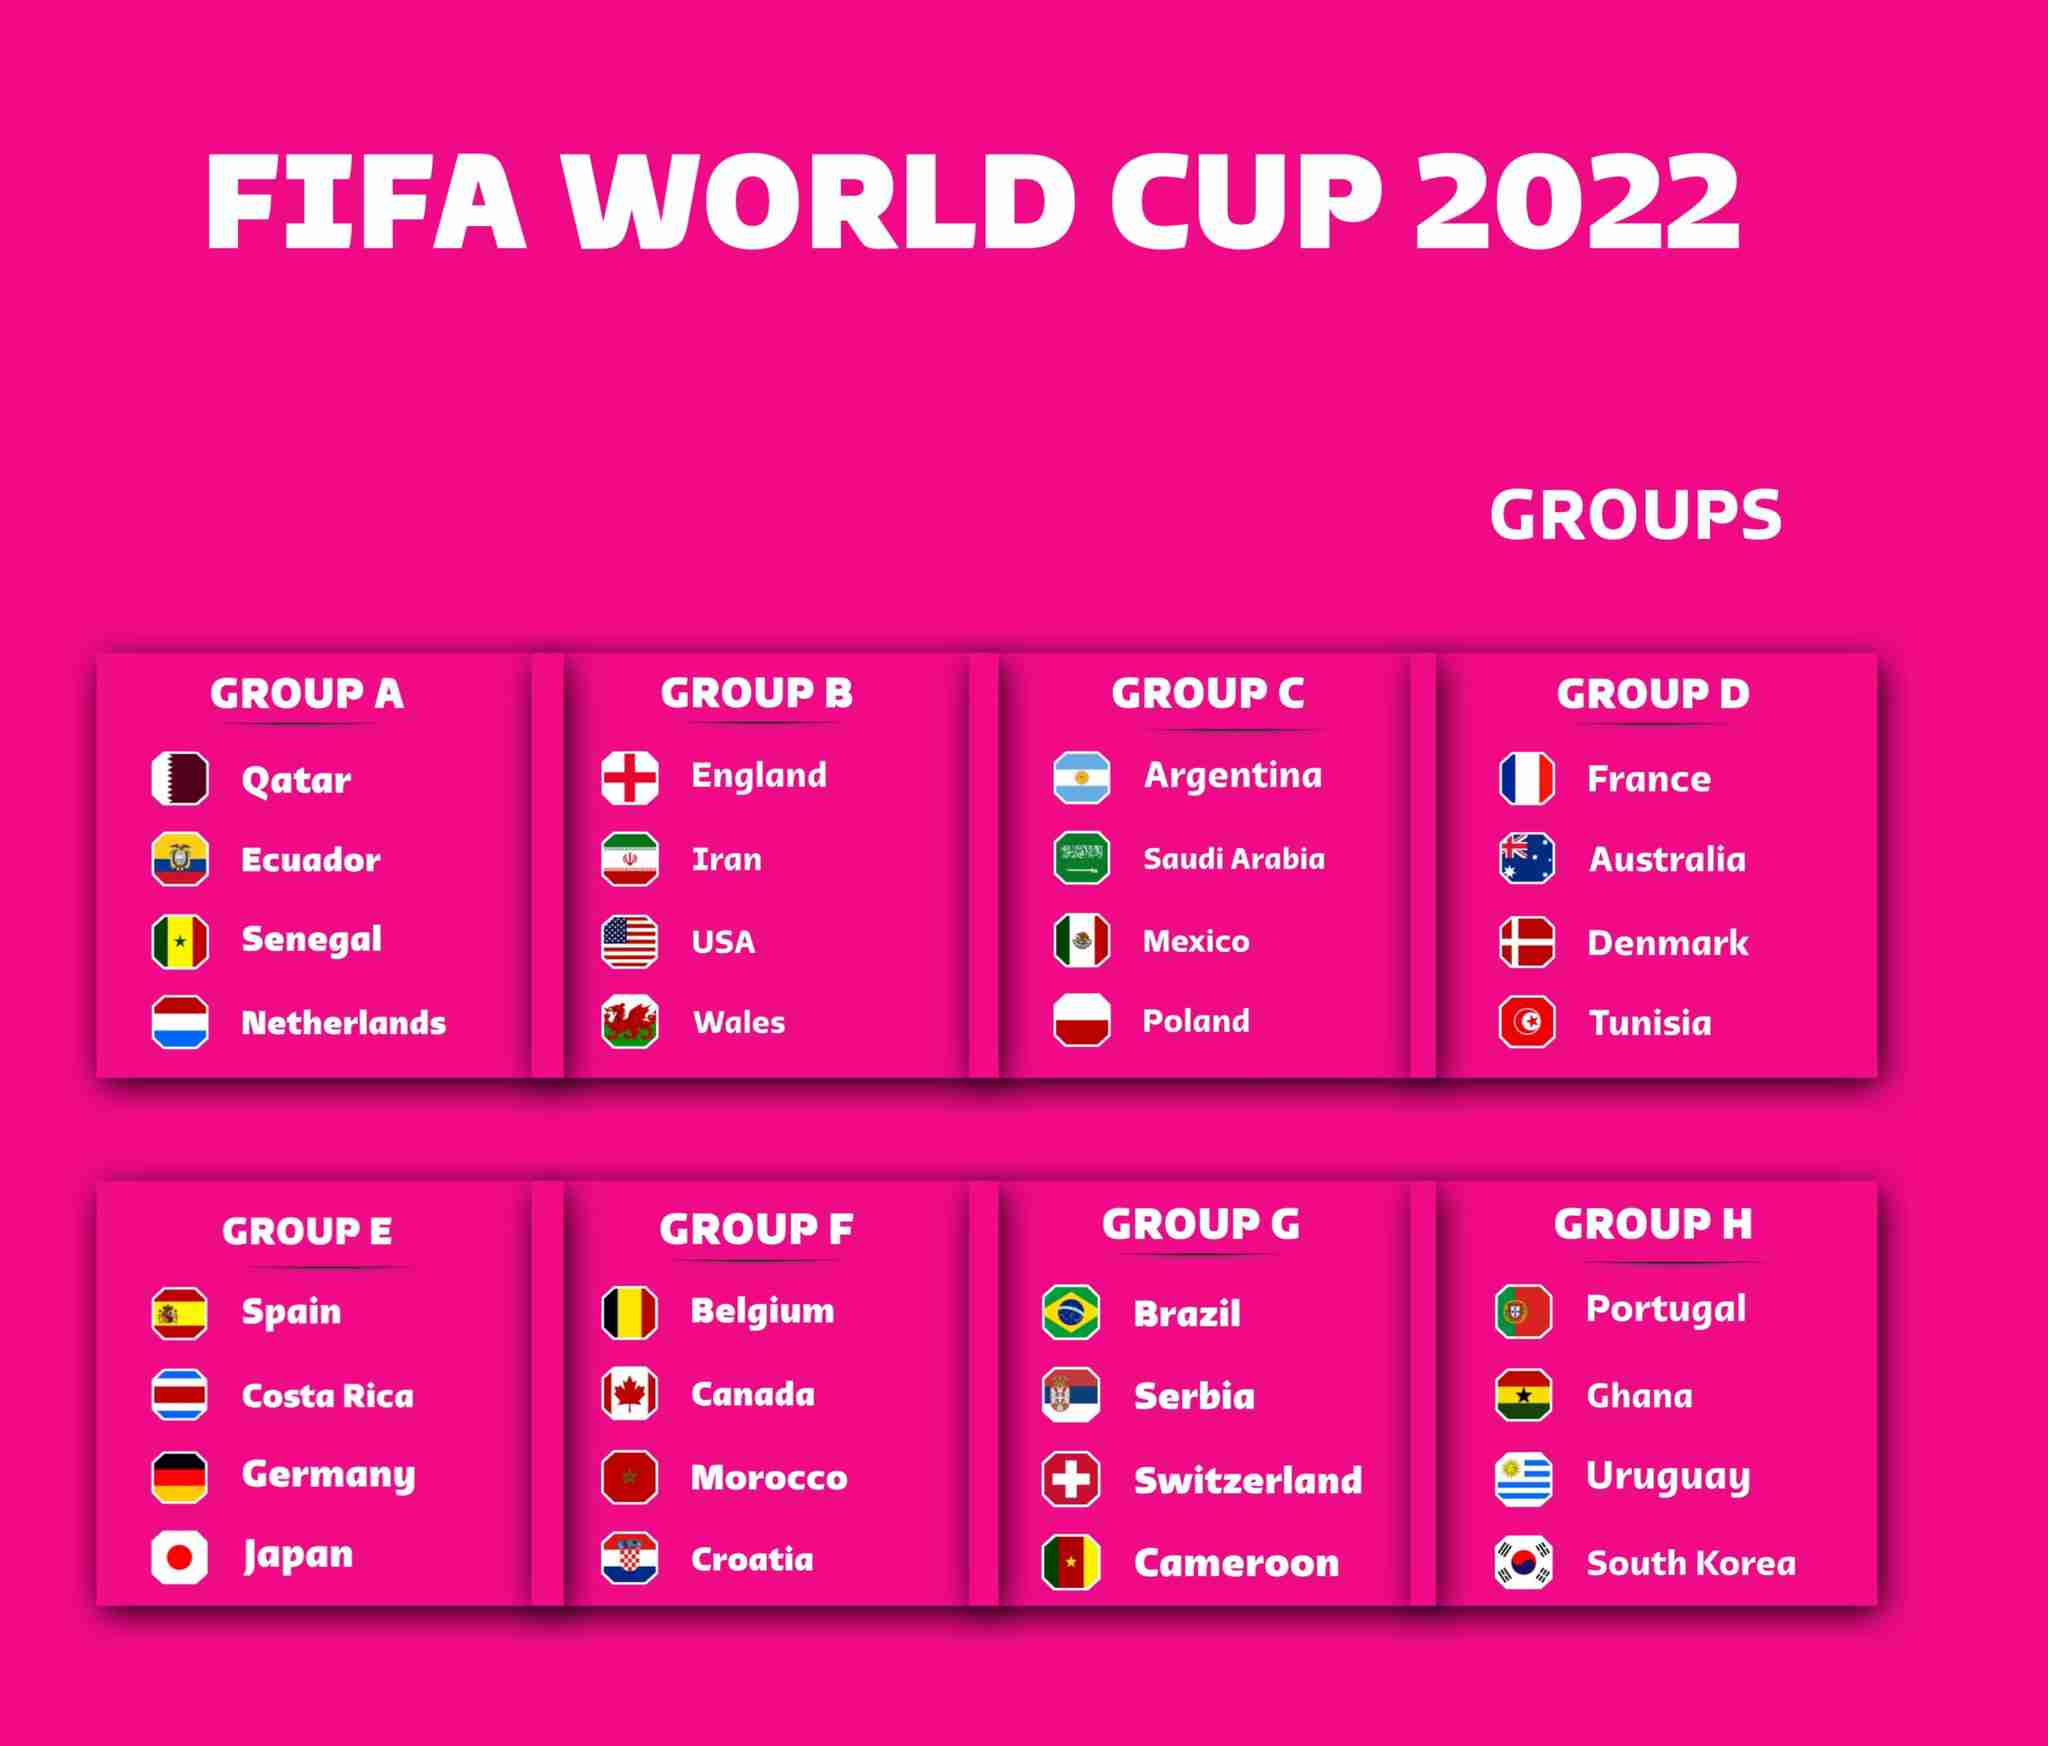 5 Countries That Have Been Handed Tough Groups At The 2022 FIFA World Cup